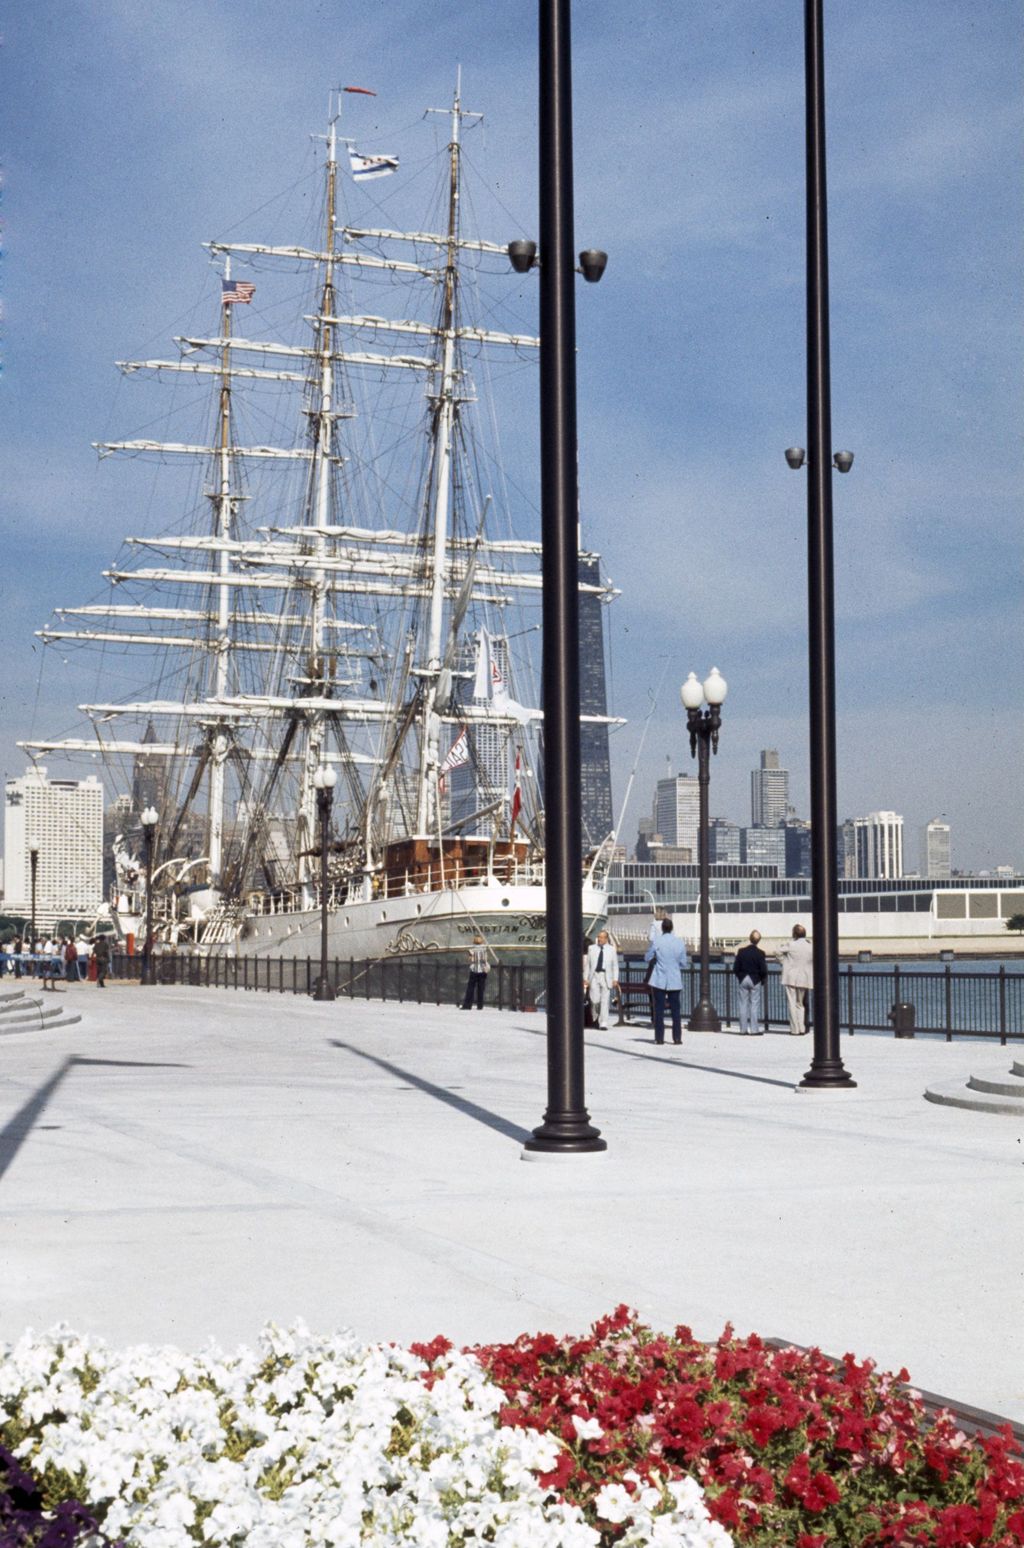 The Christian Radich docked at Navy Pier